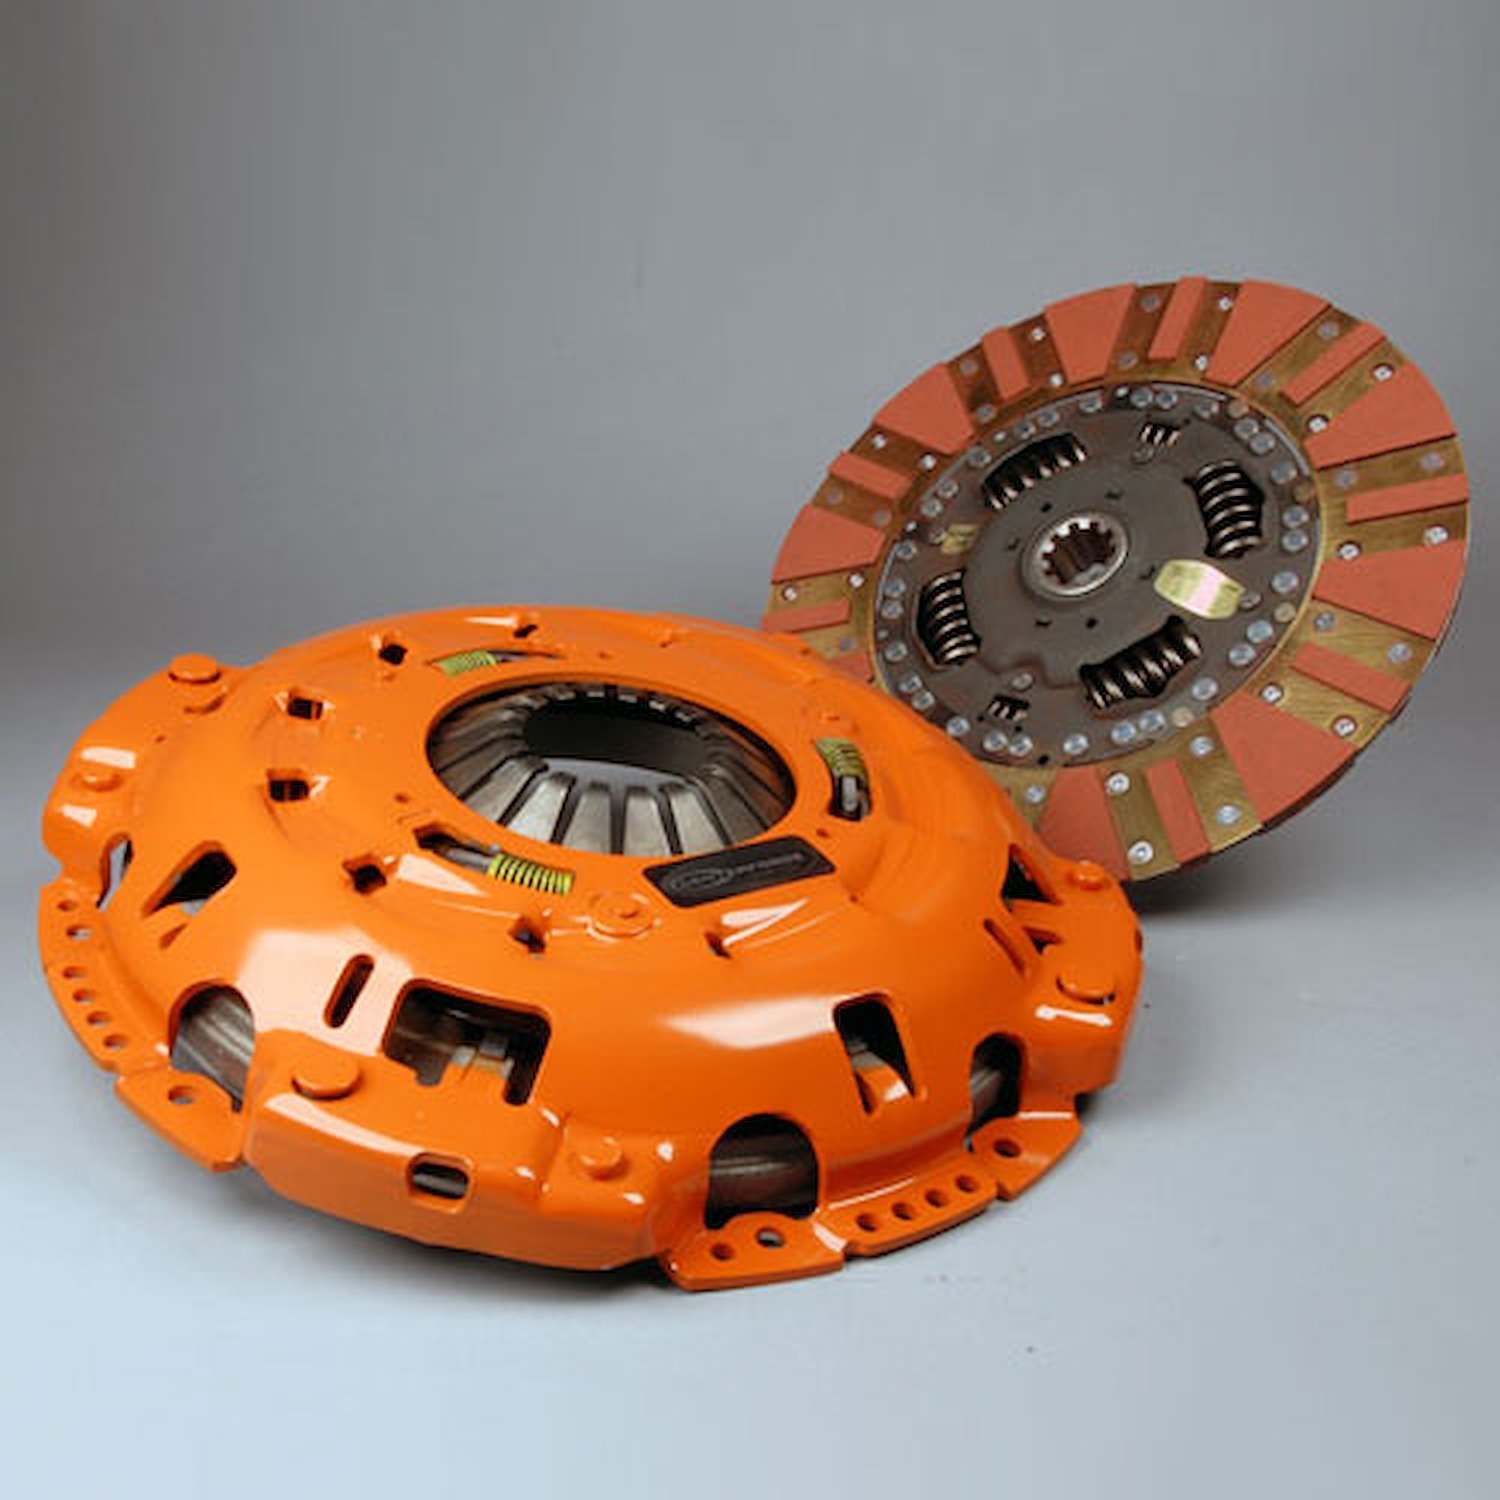 Dual Friction Clutch Includes Pressure Plate & Disc